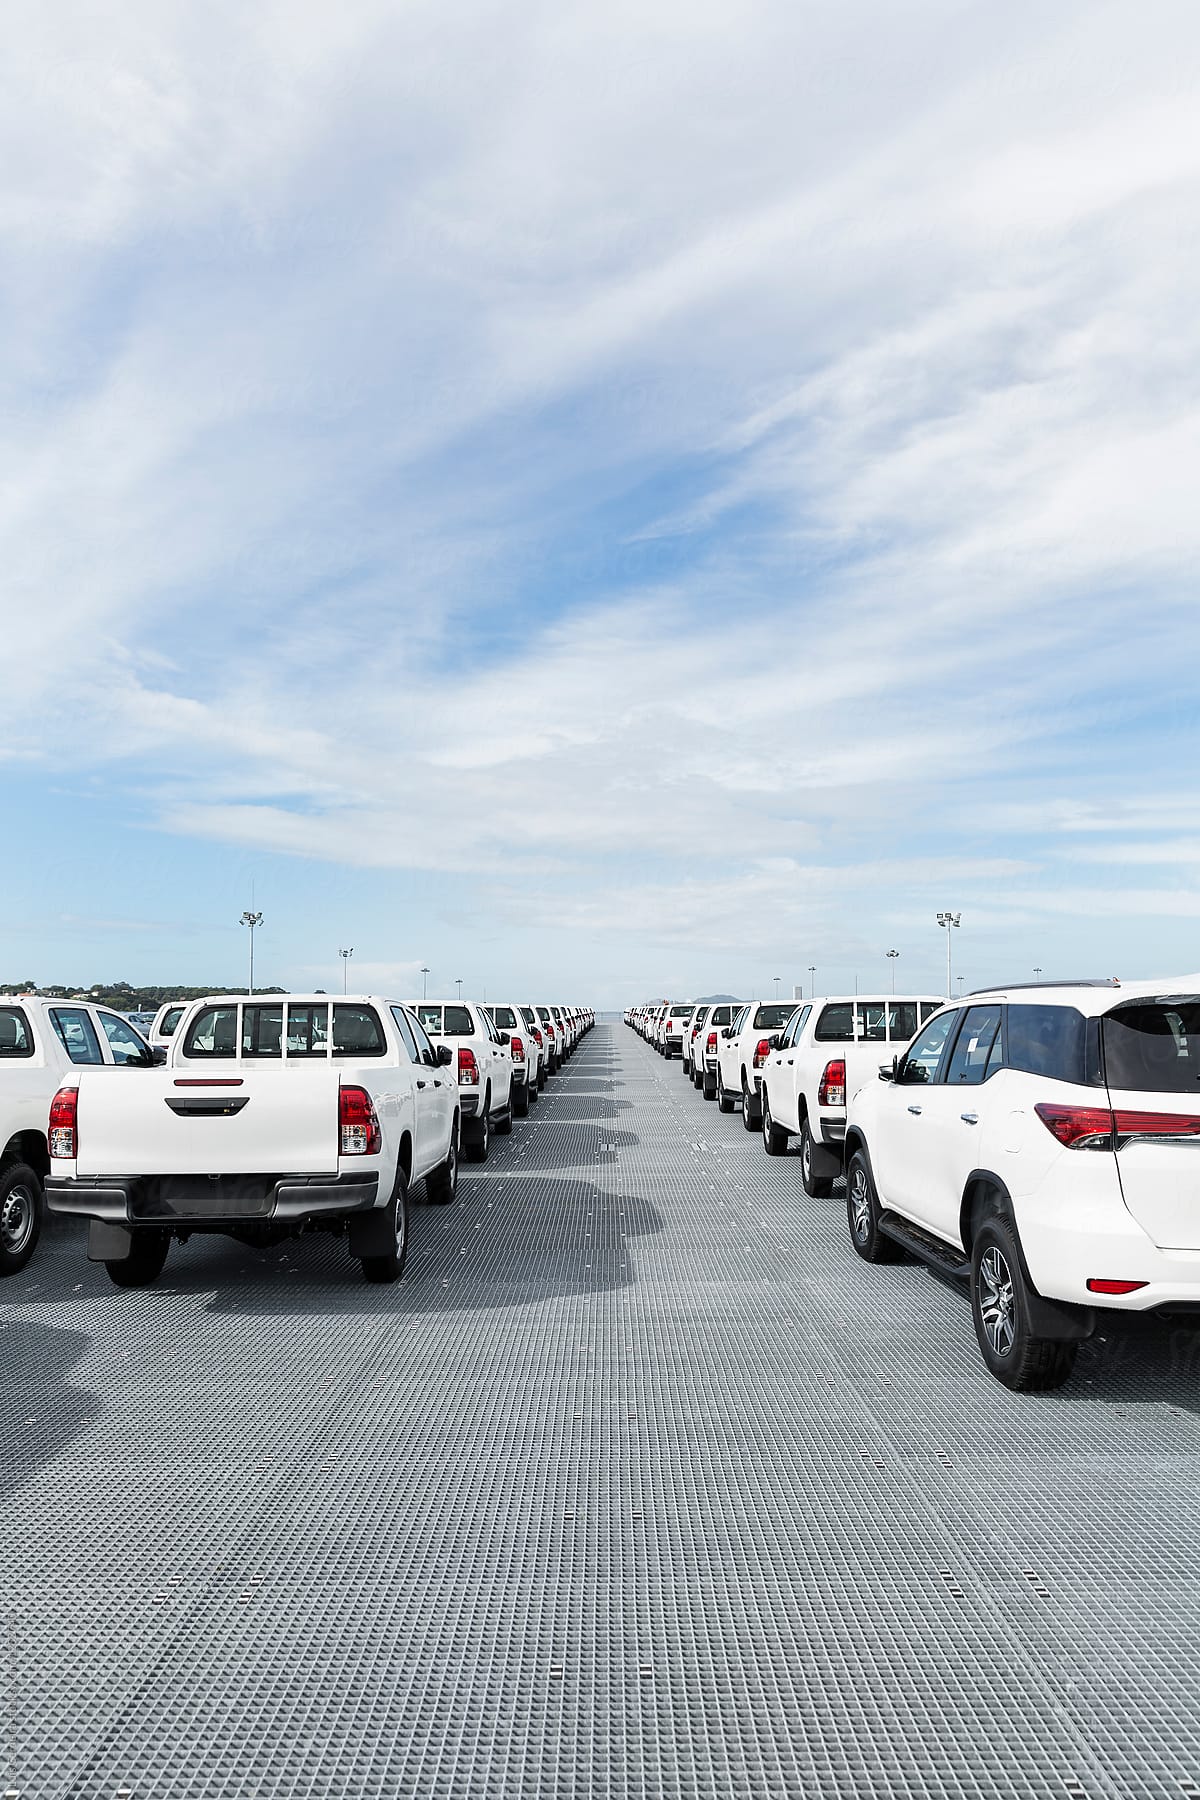 New ready to export cars in a parking lot